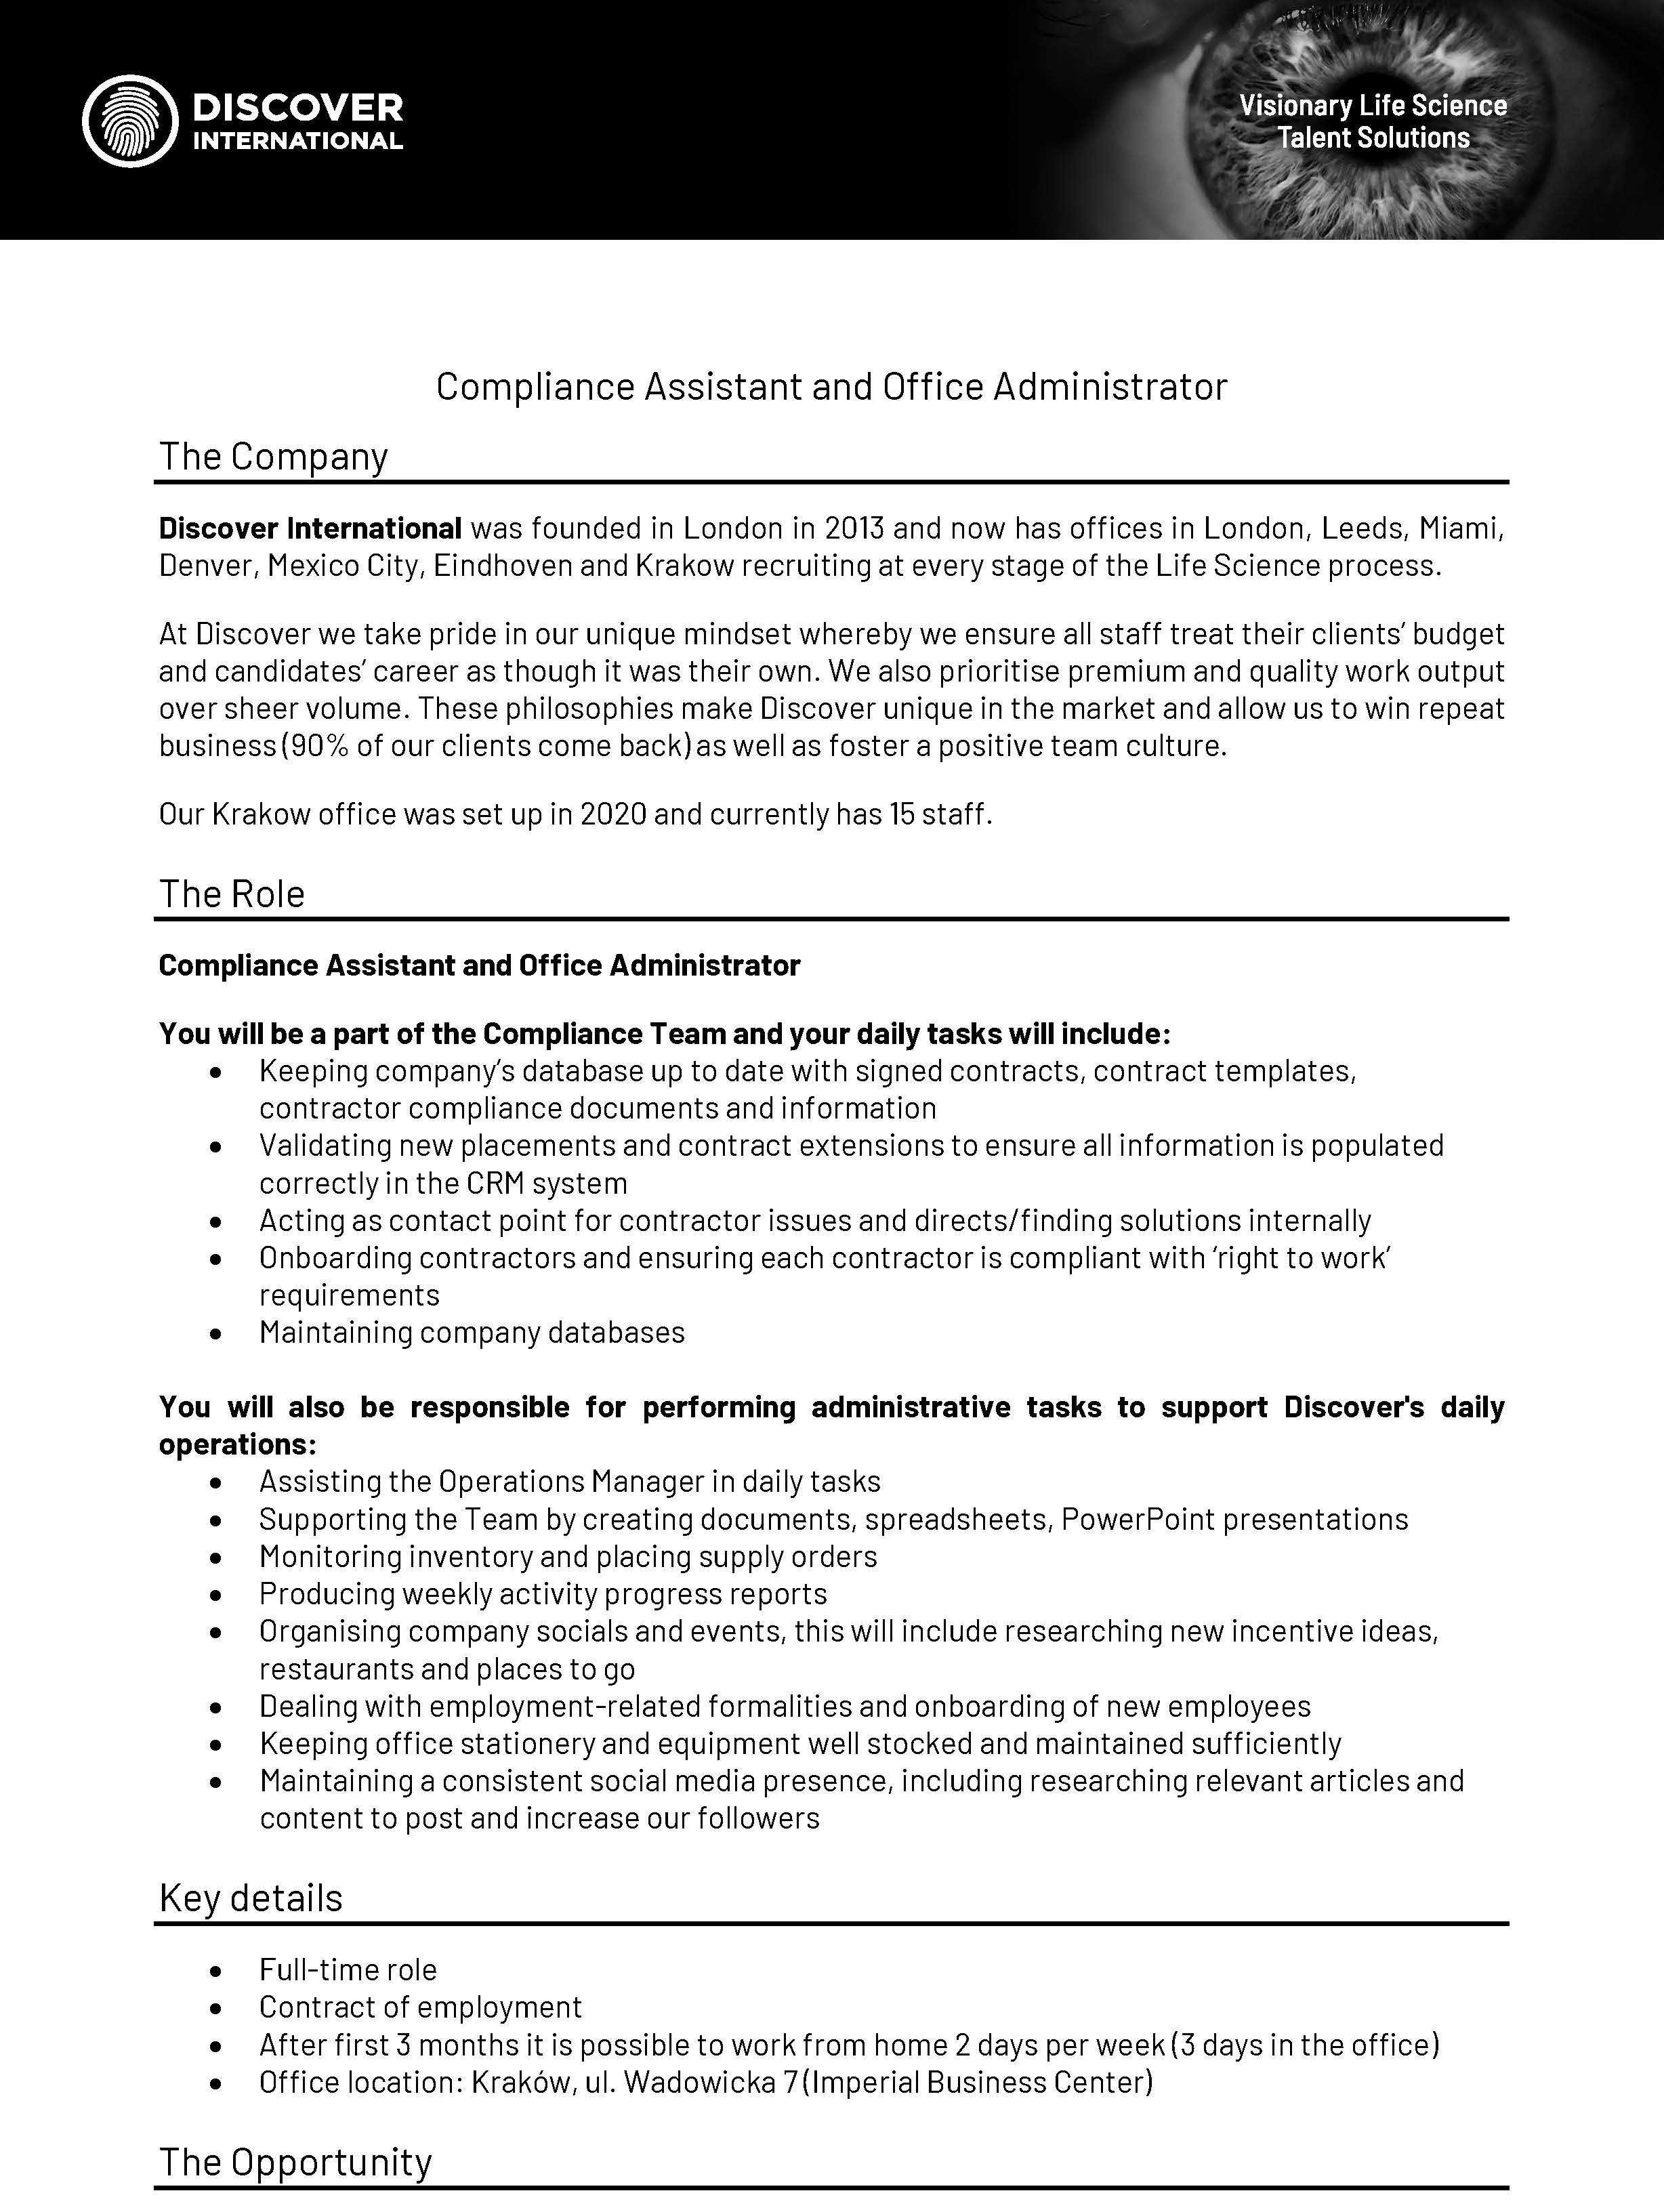 Compliance Assistant and Office Administrator - job description OIRP_Strona_1.jpg